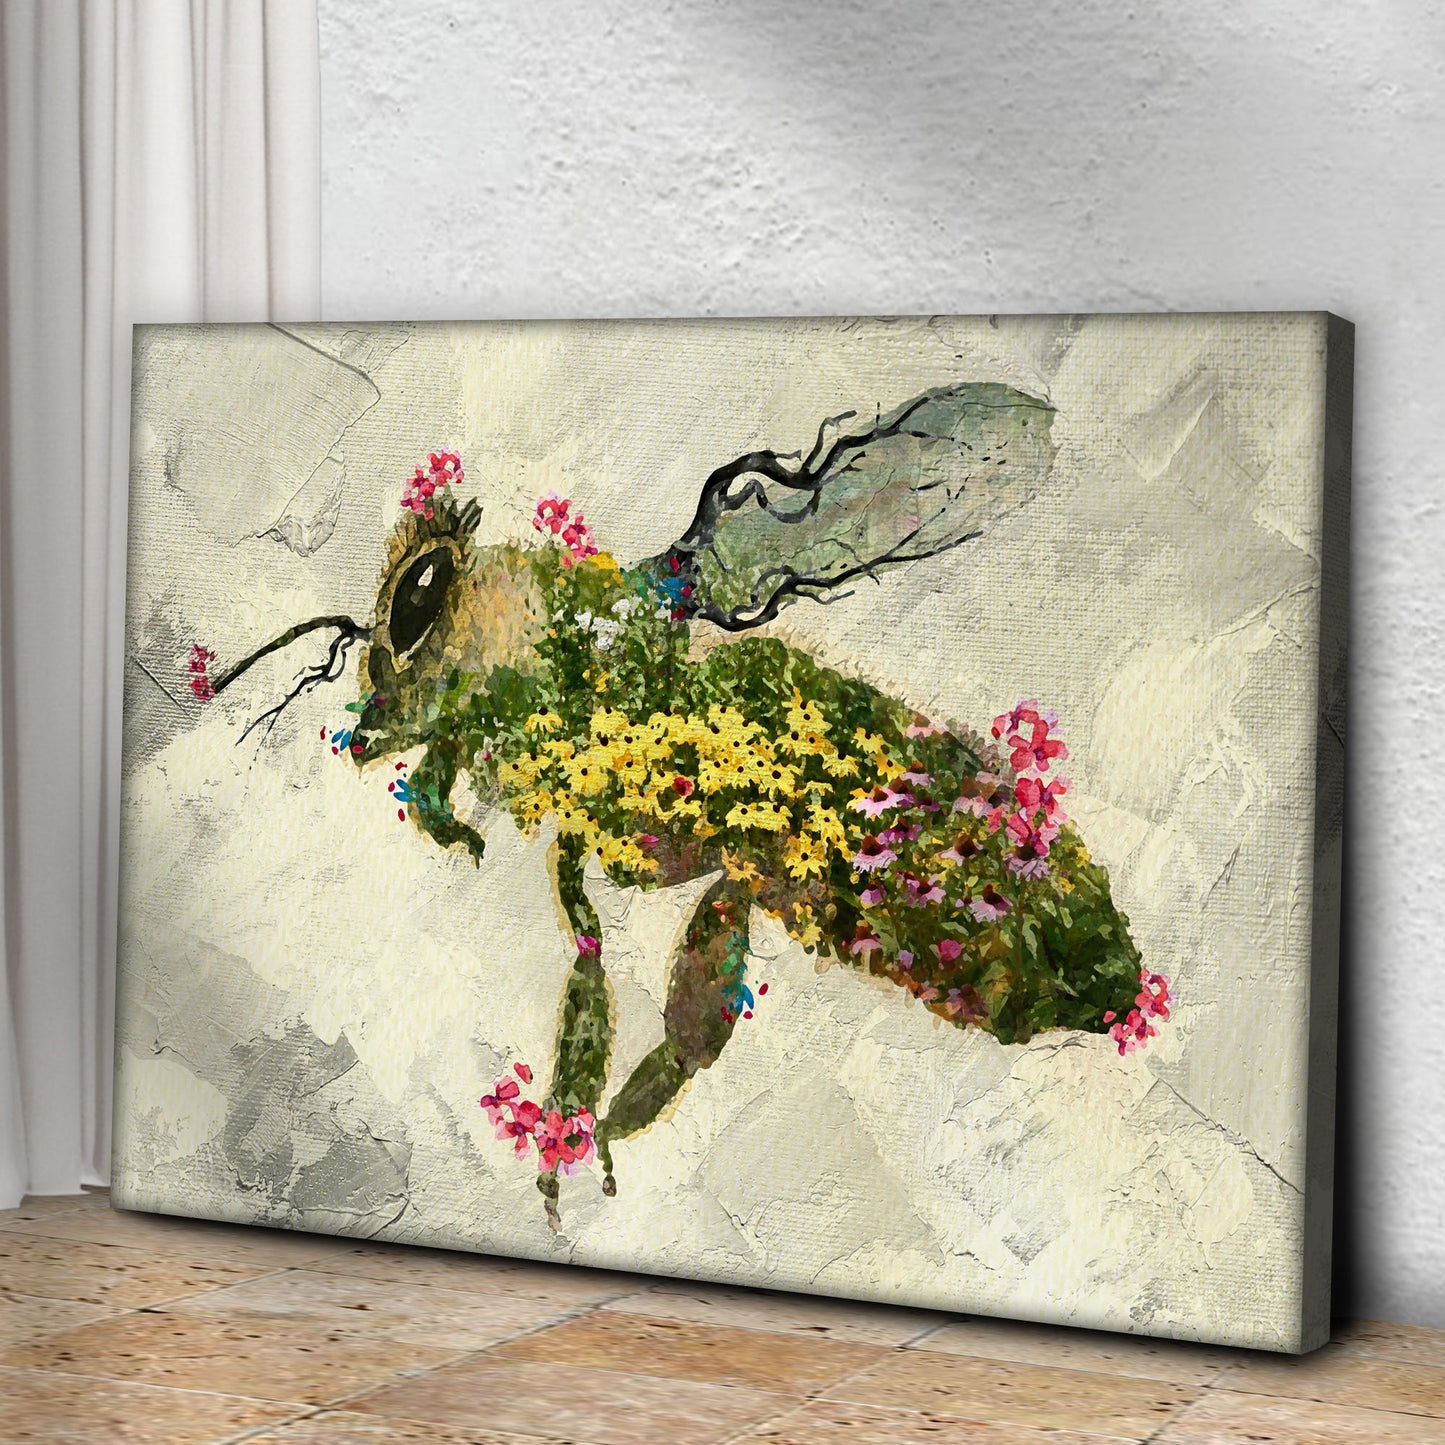 Floral Bee Abstract Painting Canvas Wall Art Style 1 - Image by Tailored Canvases